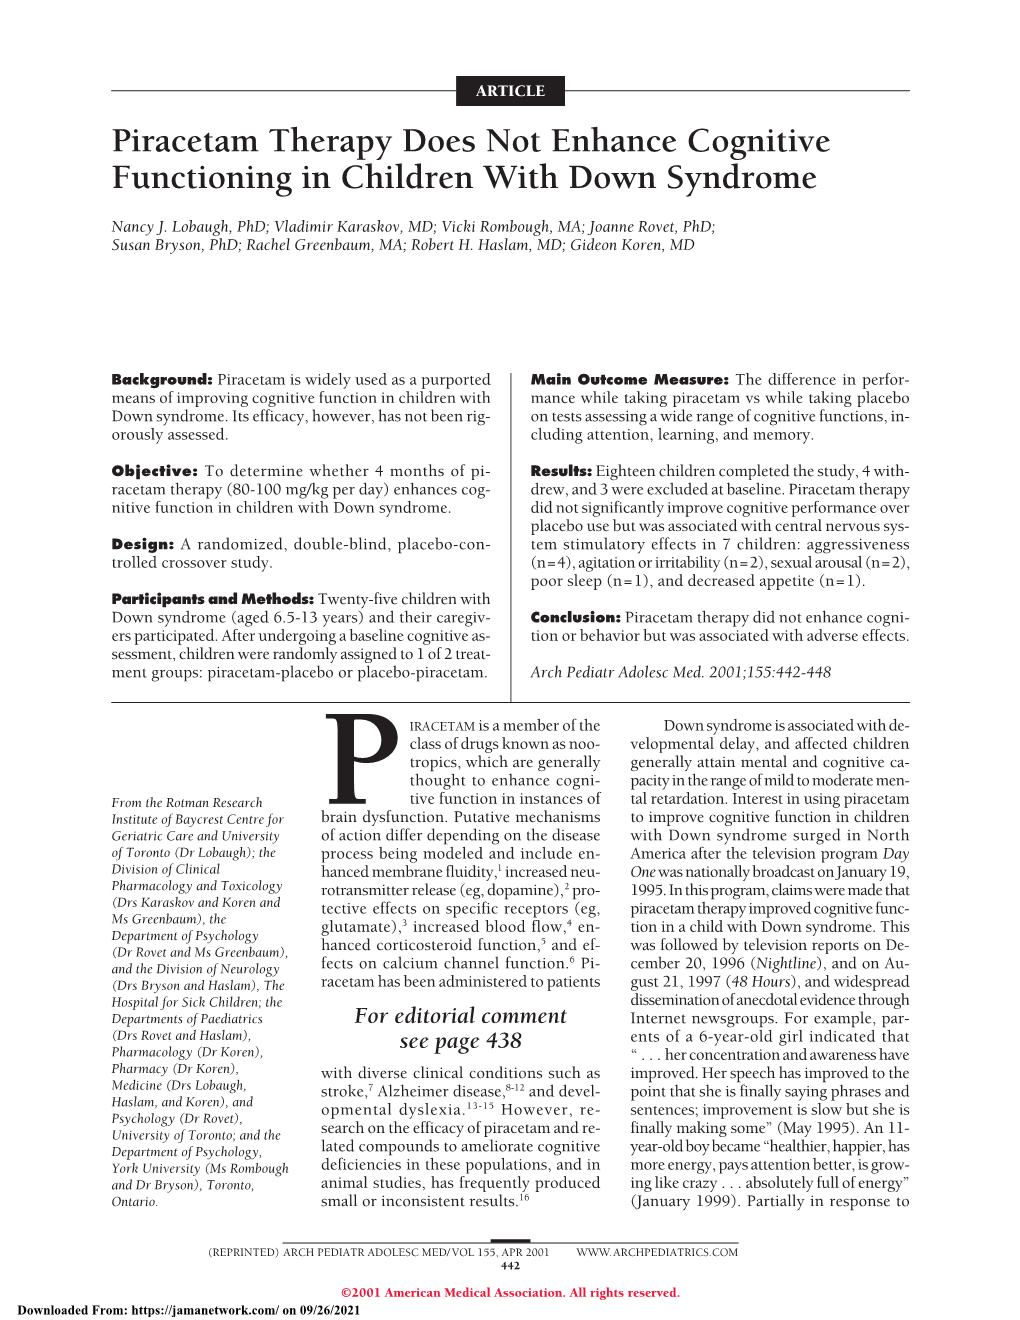 Piracetam Therapy Does Not Enhance Cognitive Functioning in Children with Down Syndrome